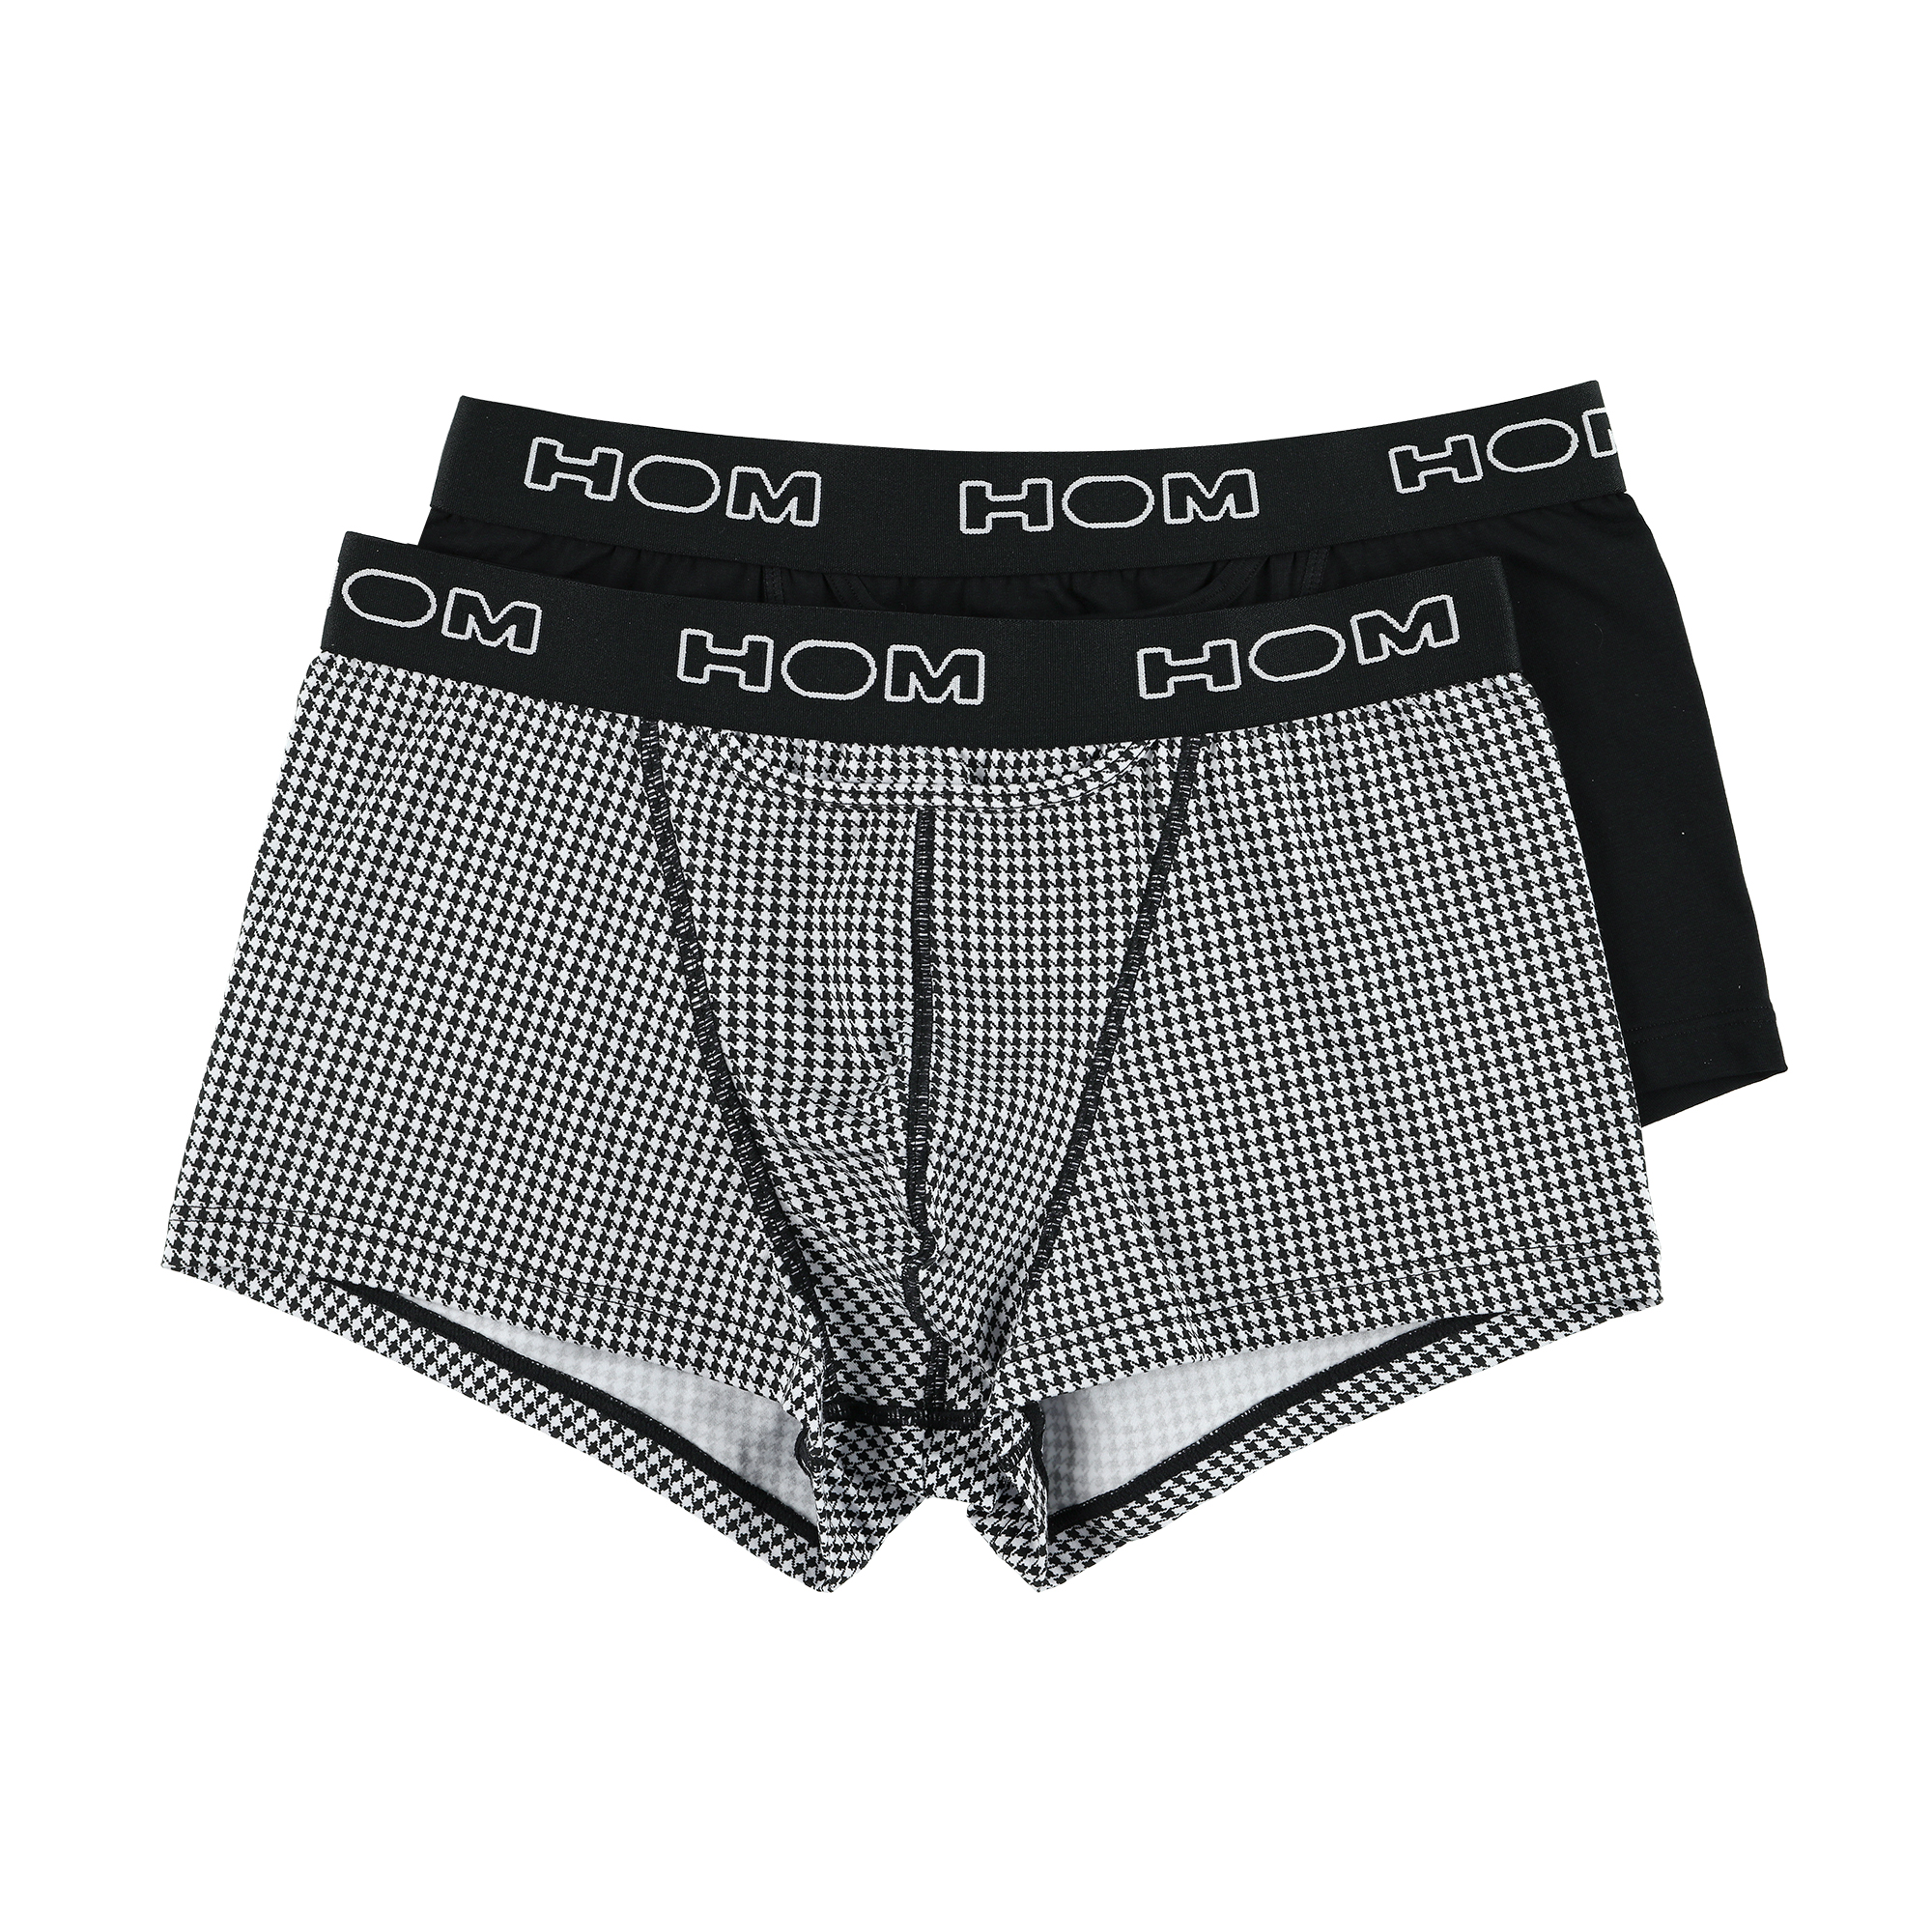 HOM two pack boxer/trunk